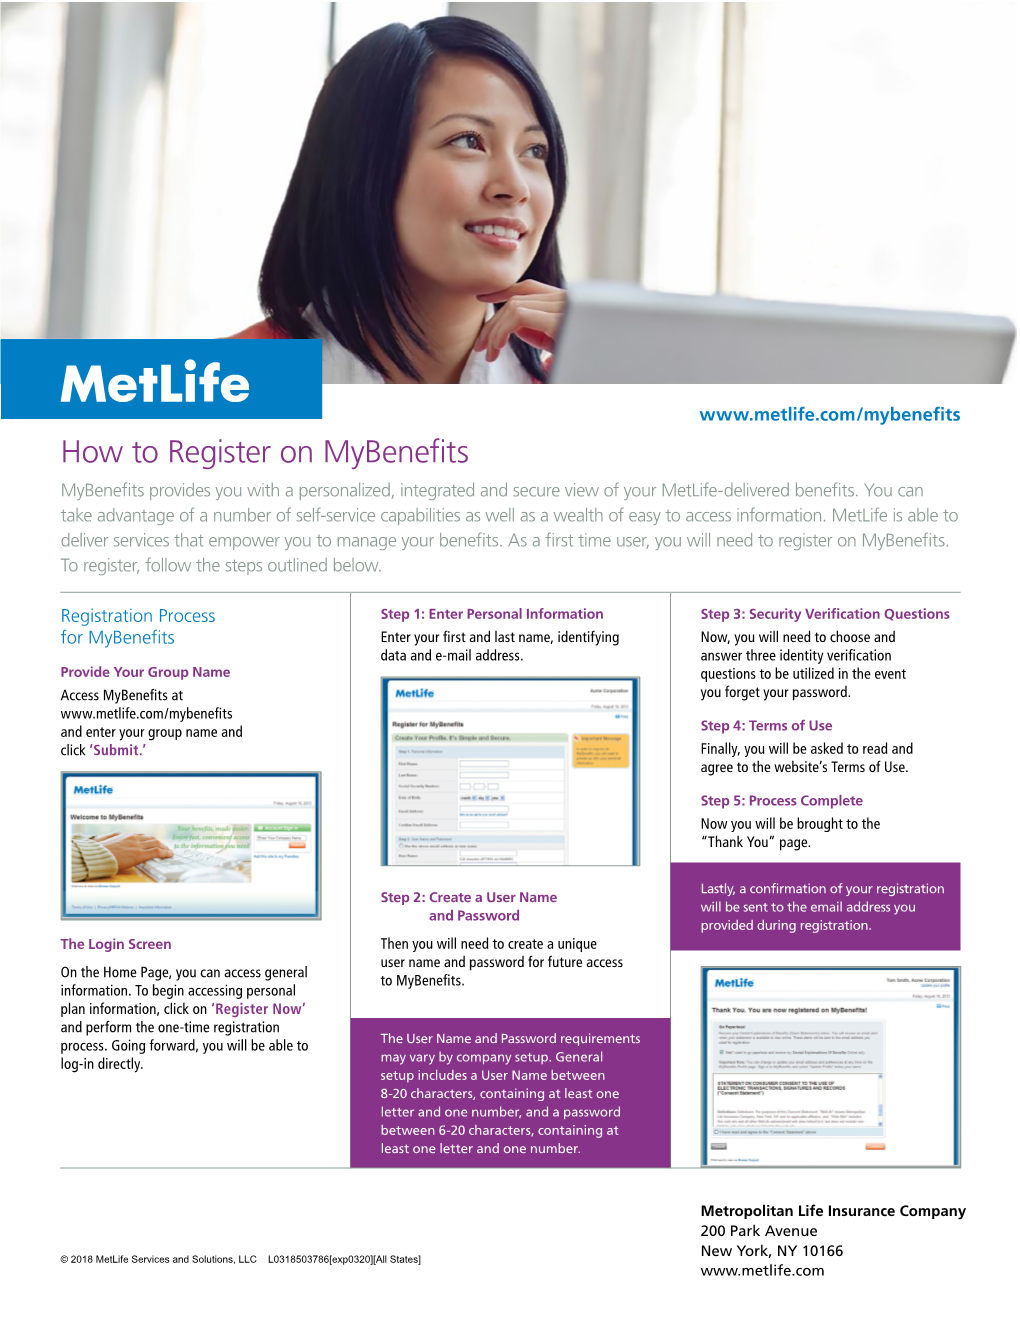 How to Register on Mybenefits Mybenefits Provides You with a Personalized, Integrated and Secure View of Your Metlife-Delivered Benefits